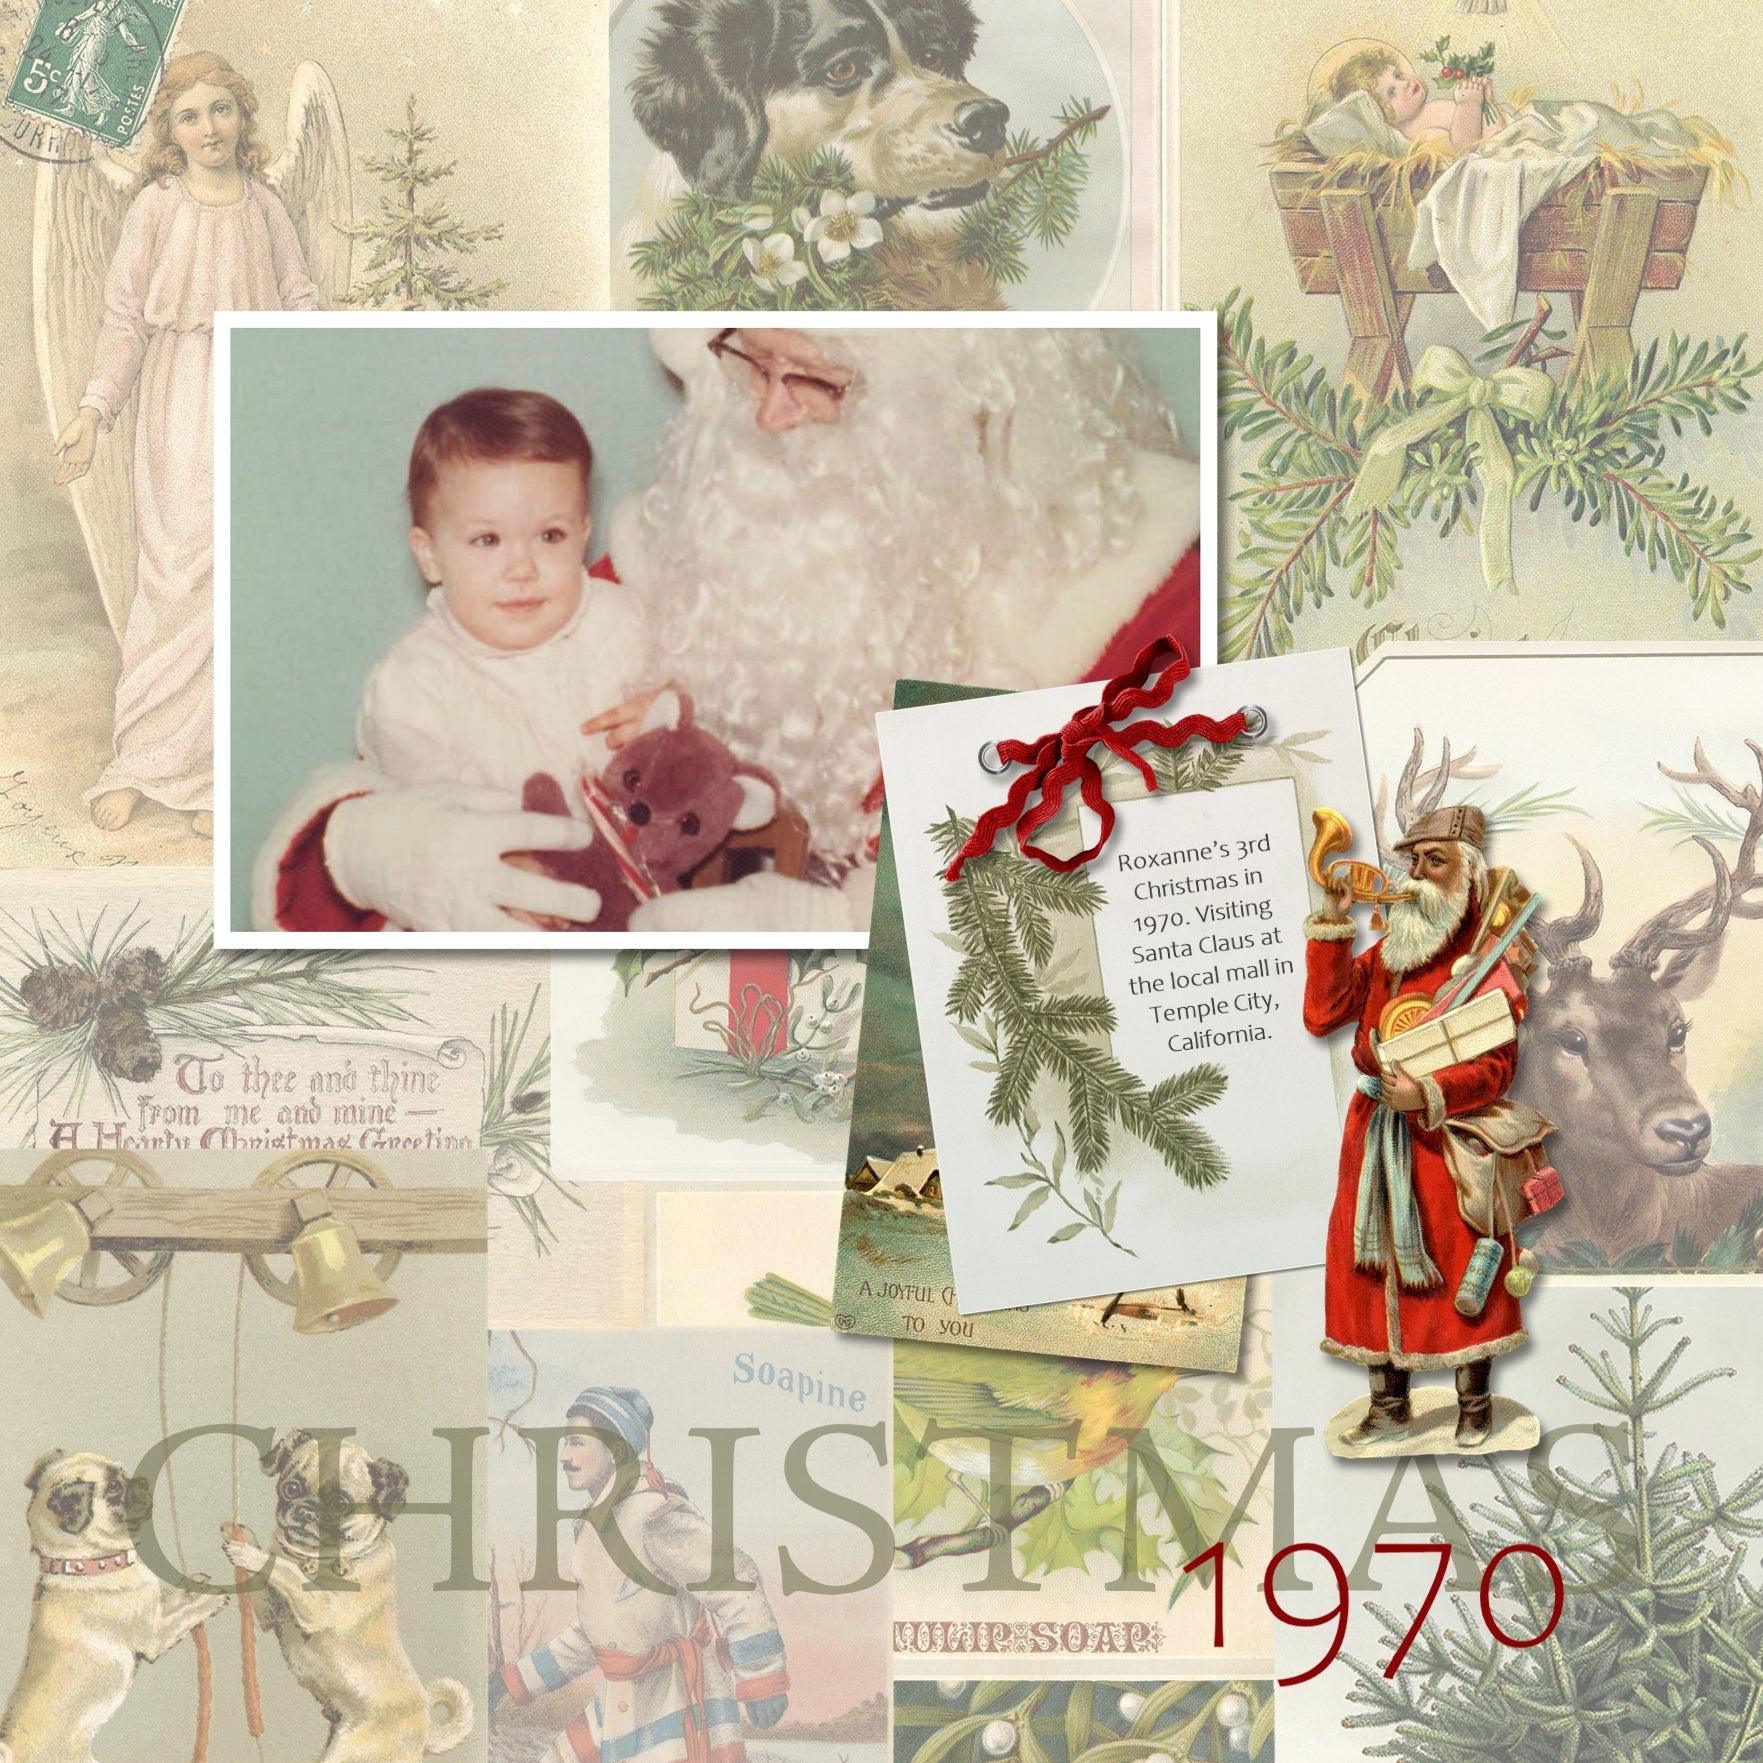 These vintage Christmas pieces of ephemera from the early 1900's will help you add character and warmth to your family genealogy projects. Collection includes 50 antique digital art embellishments including newspaper advertisements, antique postcards, and vintage labels featuring angels, Santa Claus, New Year, deer, reindeer, baby Jesus, manger, mistletoe, dogs, music sheets, evergreen, pine, holly, and more.